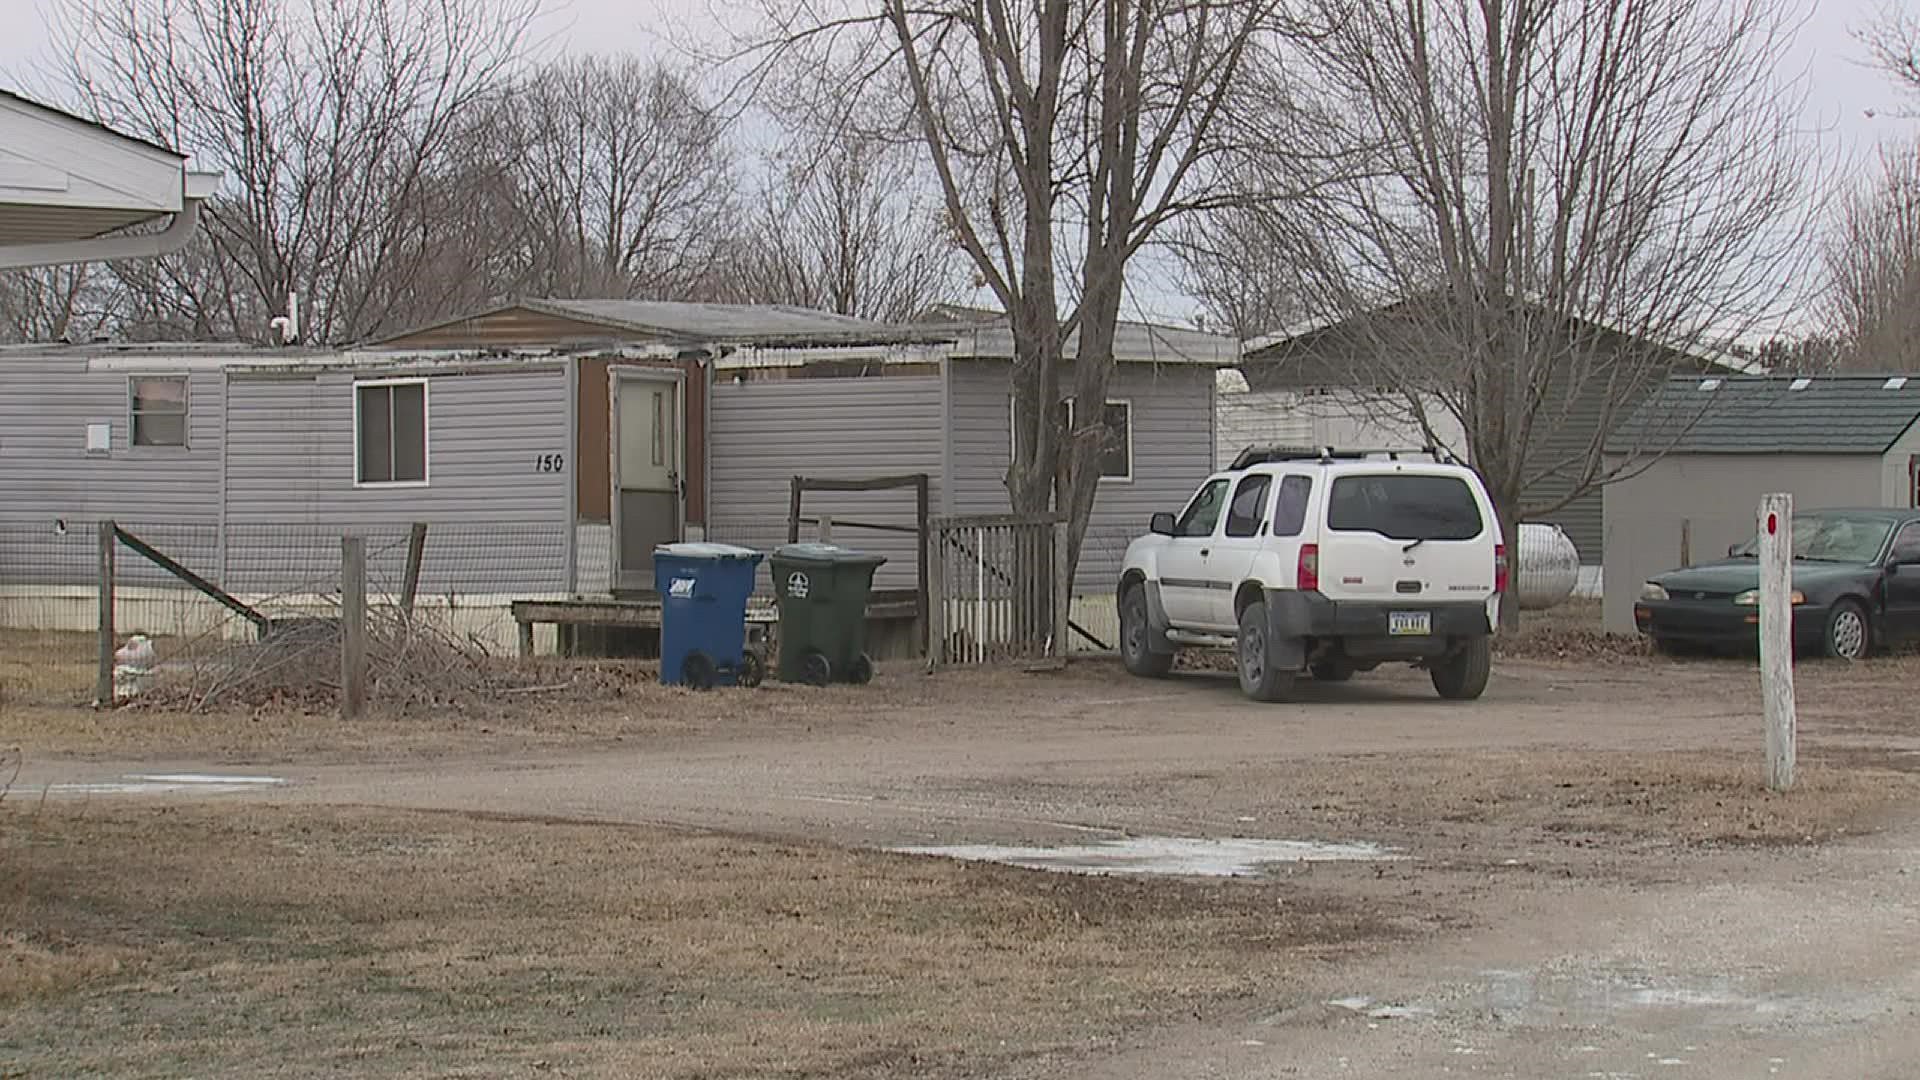 The dogs were living in the home with an "excessive" amount of animal waste and lack of food and medical care, according to the Muscatine Police Department.